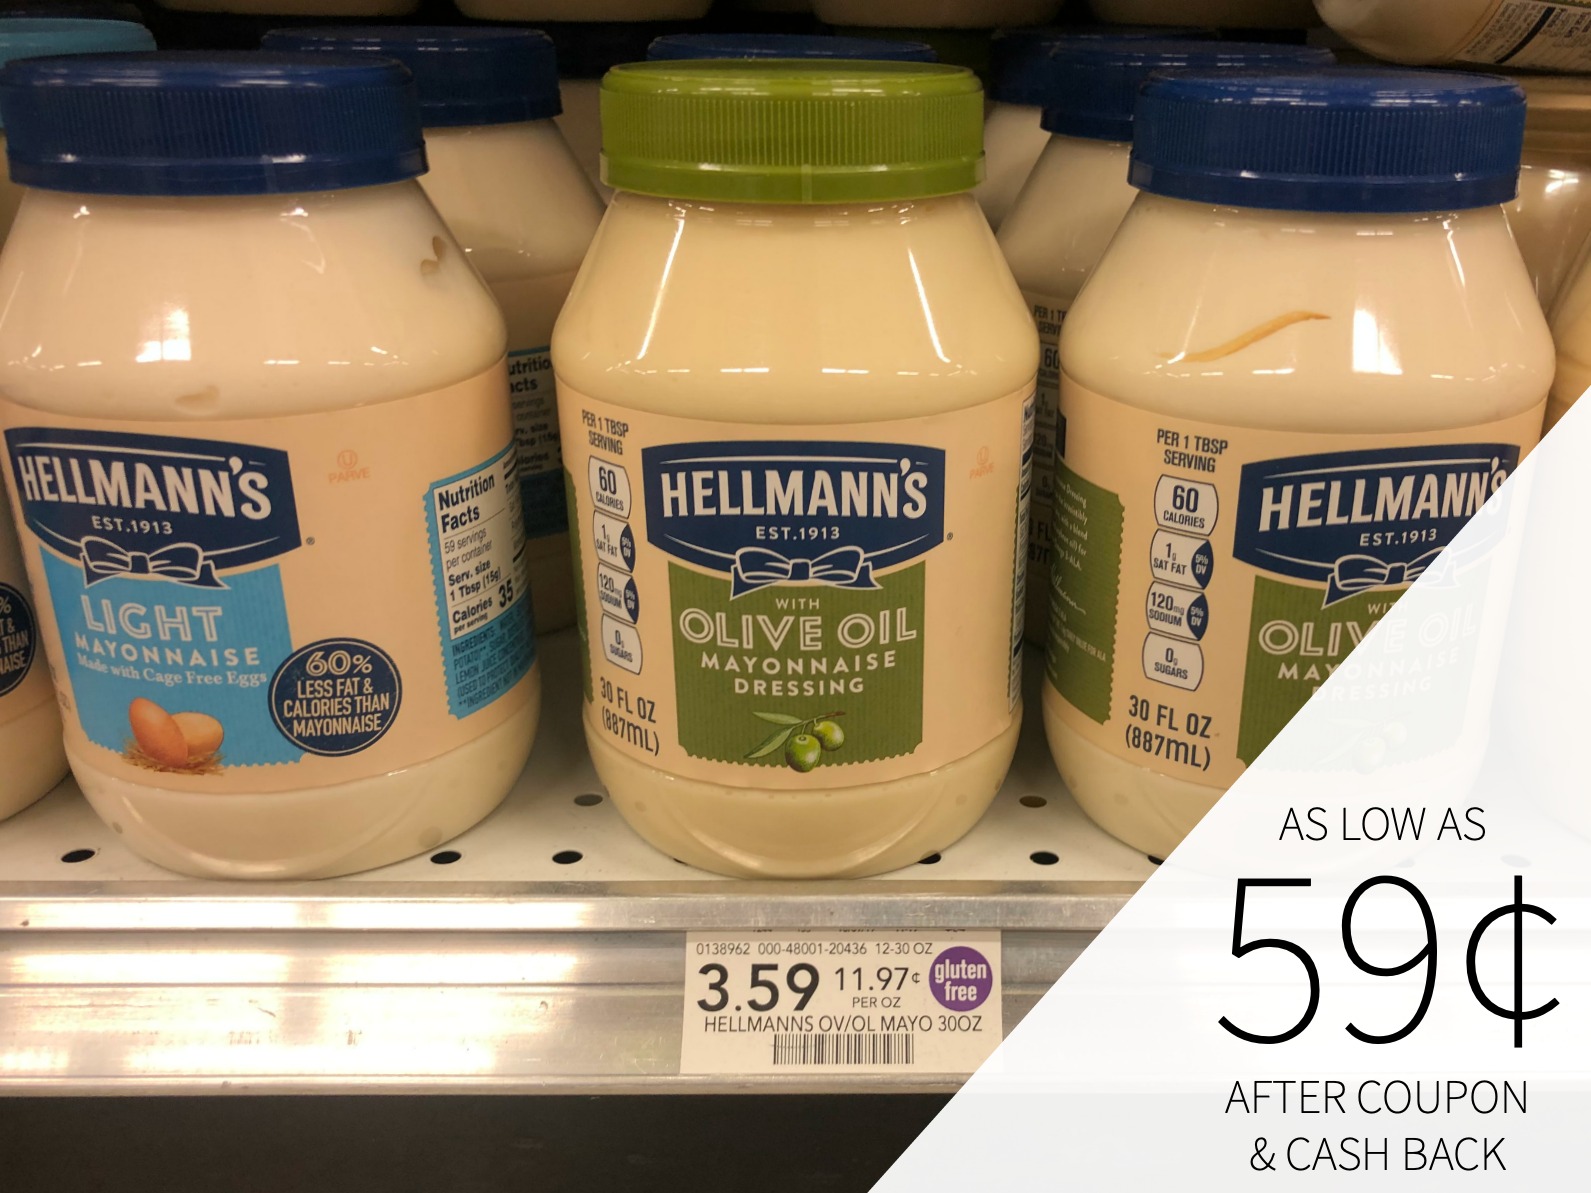 Fantastic Deal On Hellmann's Mayonnaise At Publix - Save Now! on I Heart Publix